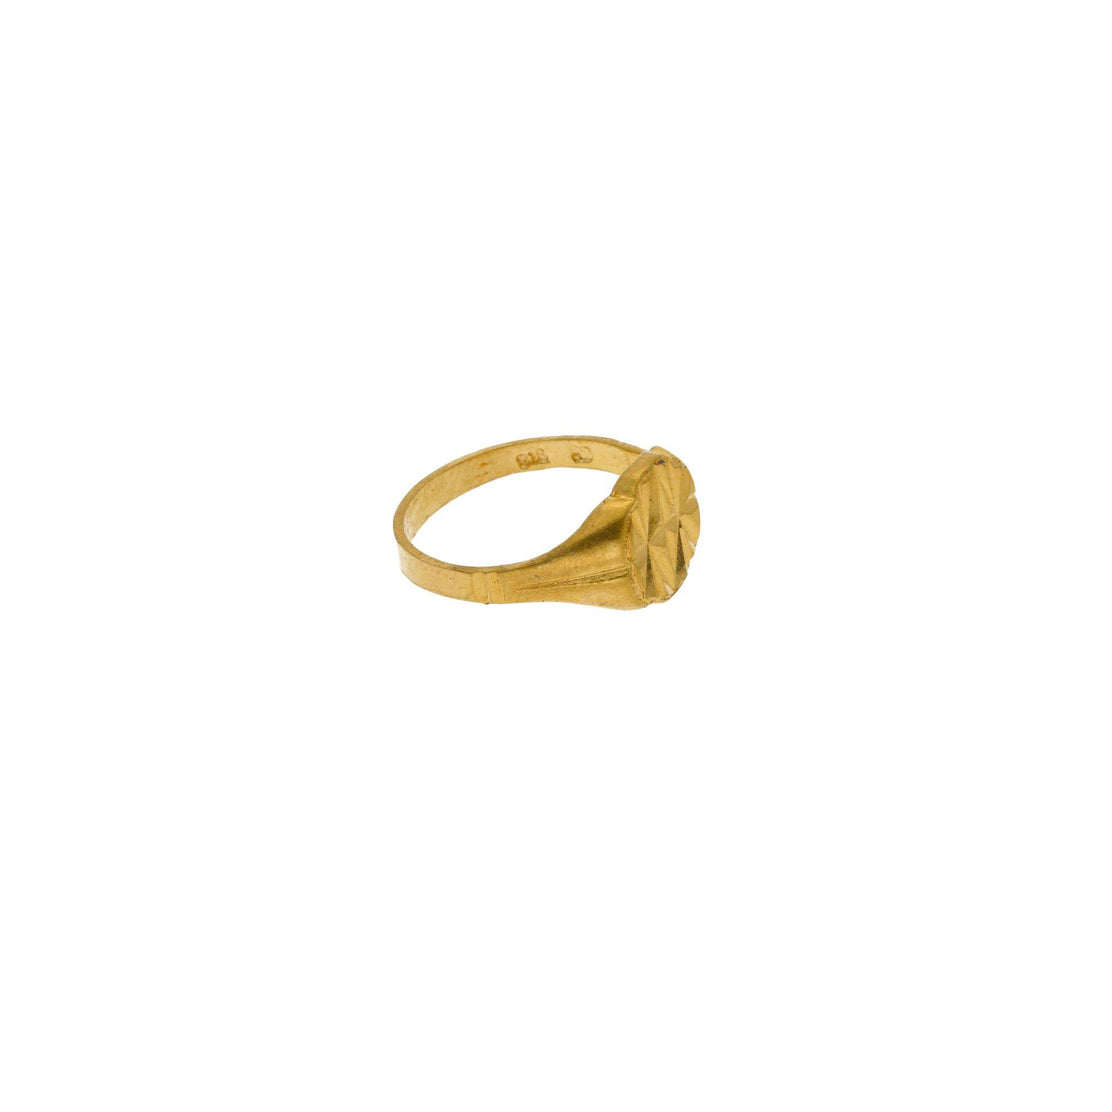 Buy 22Kt Beautiful Baby Boy Gold Ring 93VF3460 Online from Vaibhav Jewellers